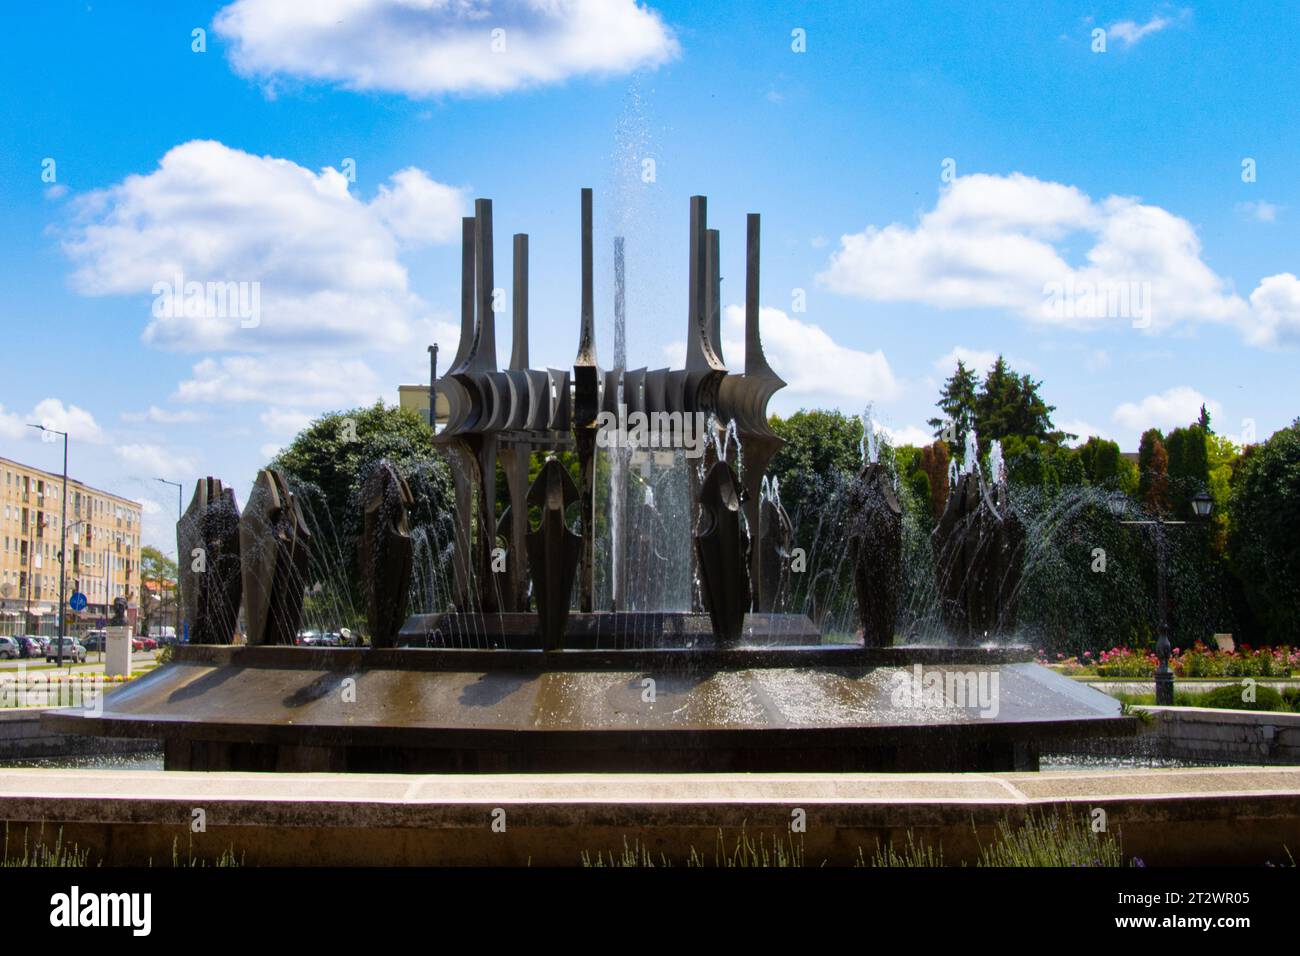 Water fountain on a summer day in the center of Carei, Satu Mare county, Romania Stock Photo